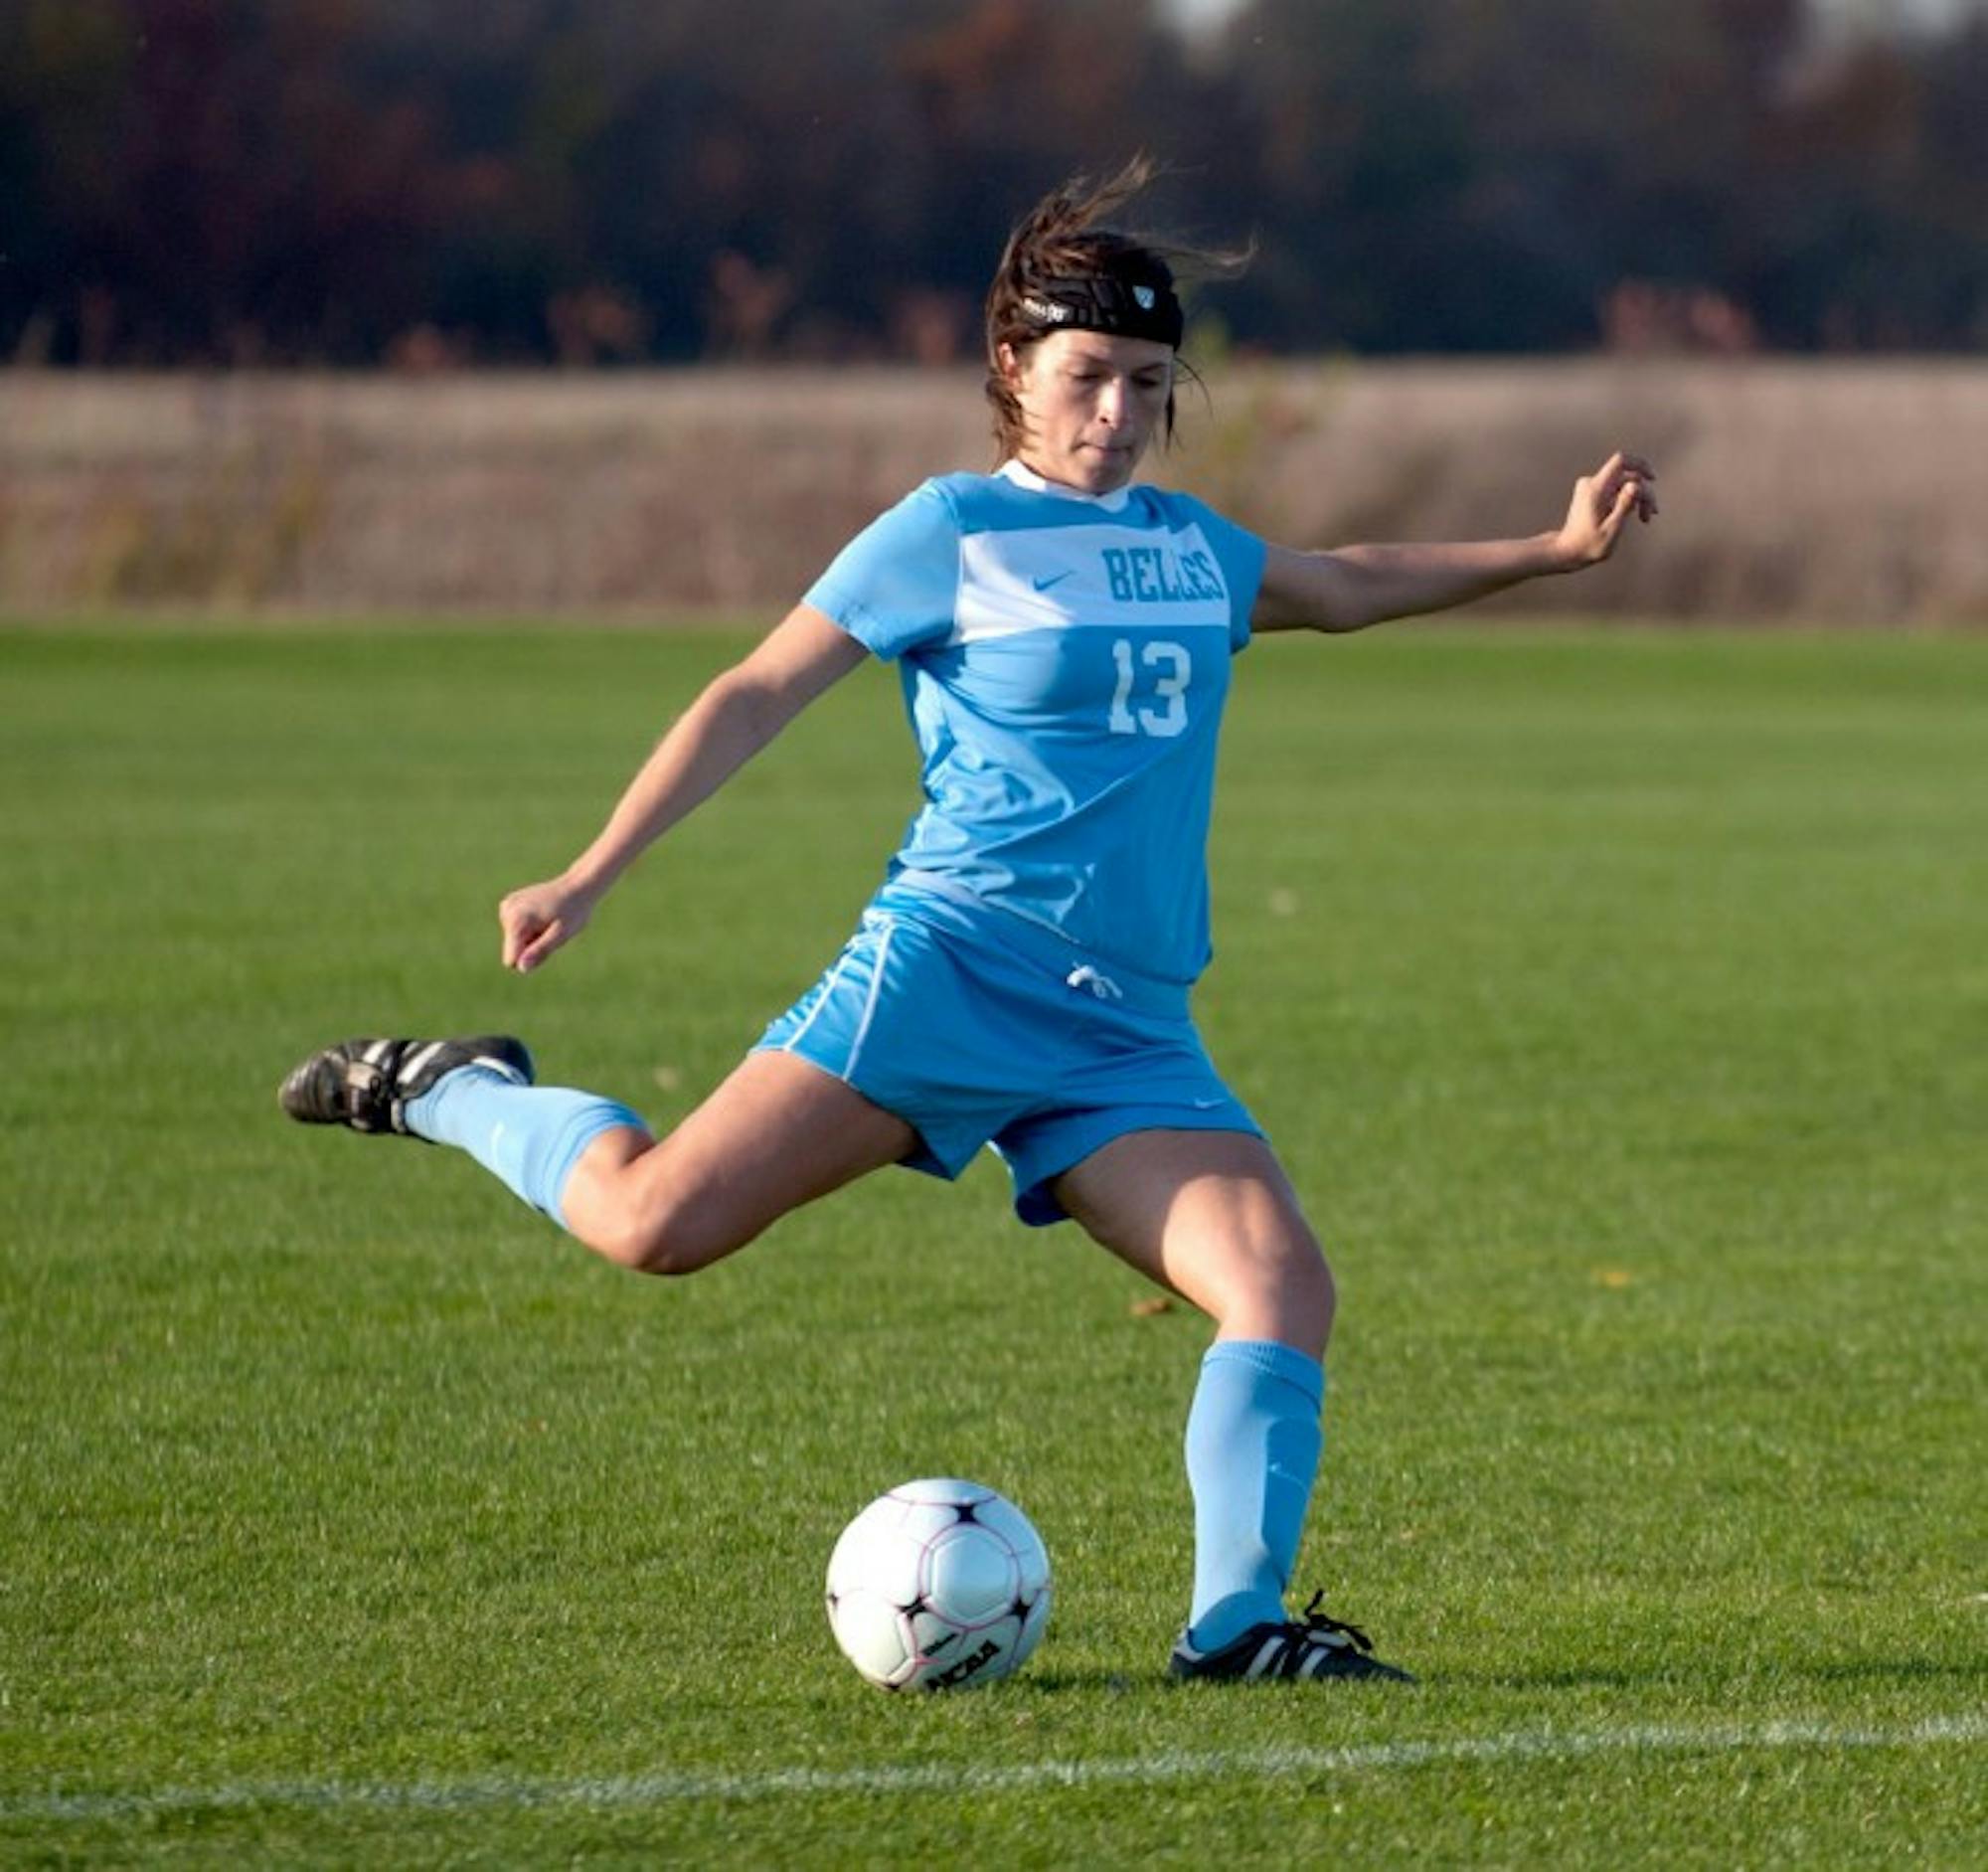 Sophomore defender Emily Rompola lines up a pass during a 2-0 loss to Olivet on Oct. 28 at Saint Mary's Soccer Field.